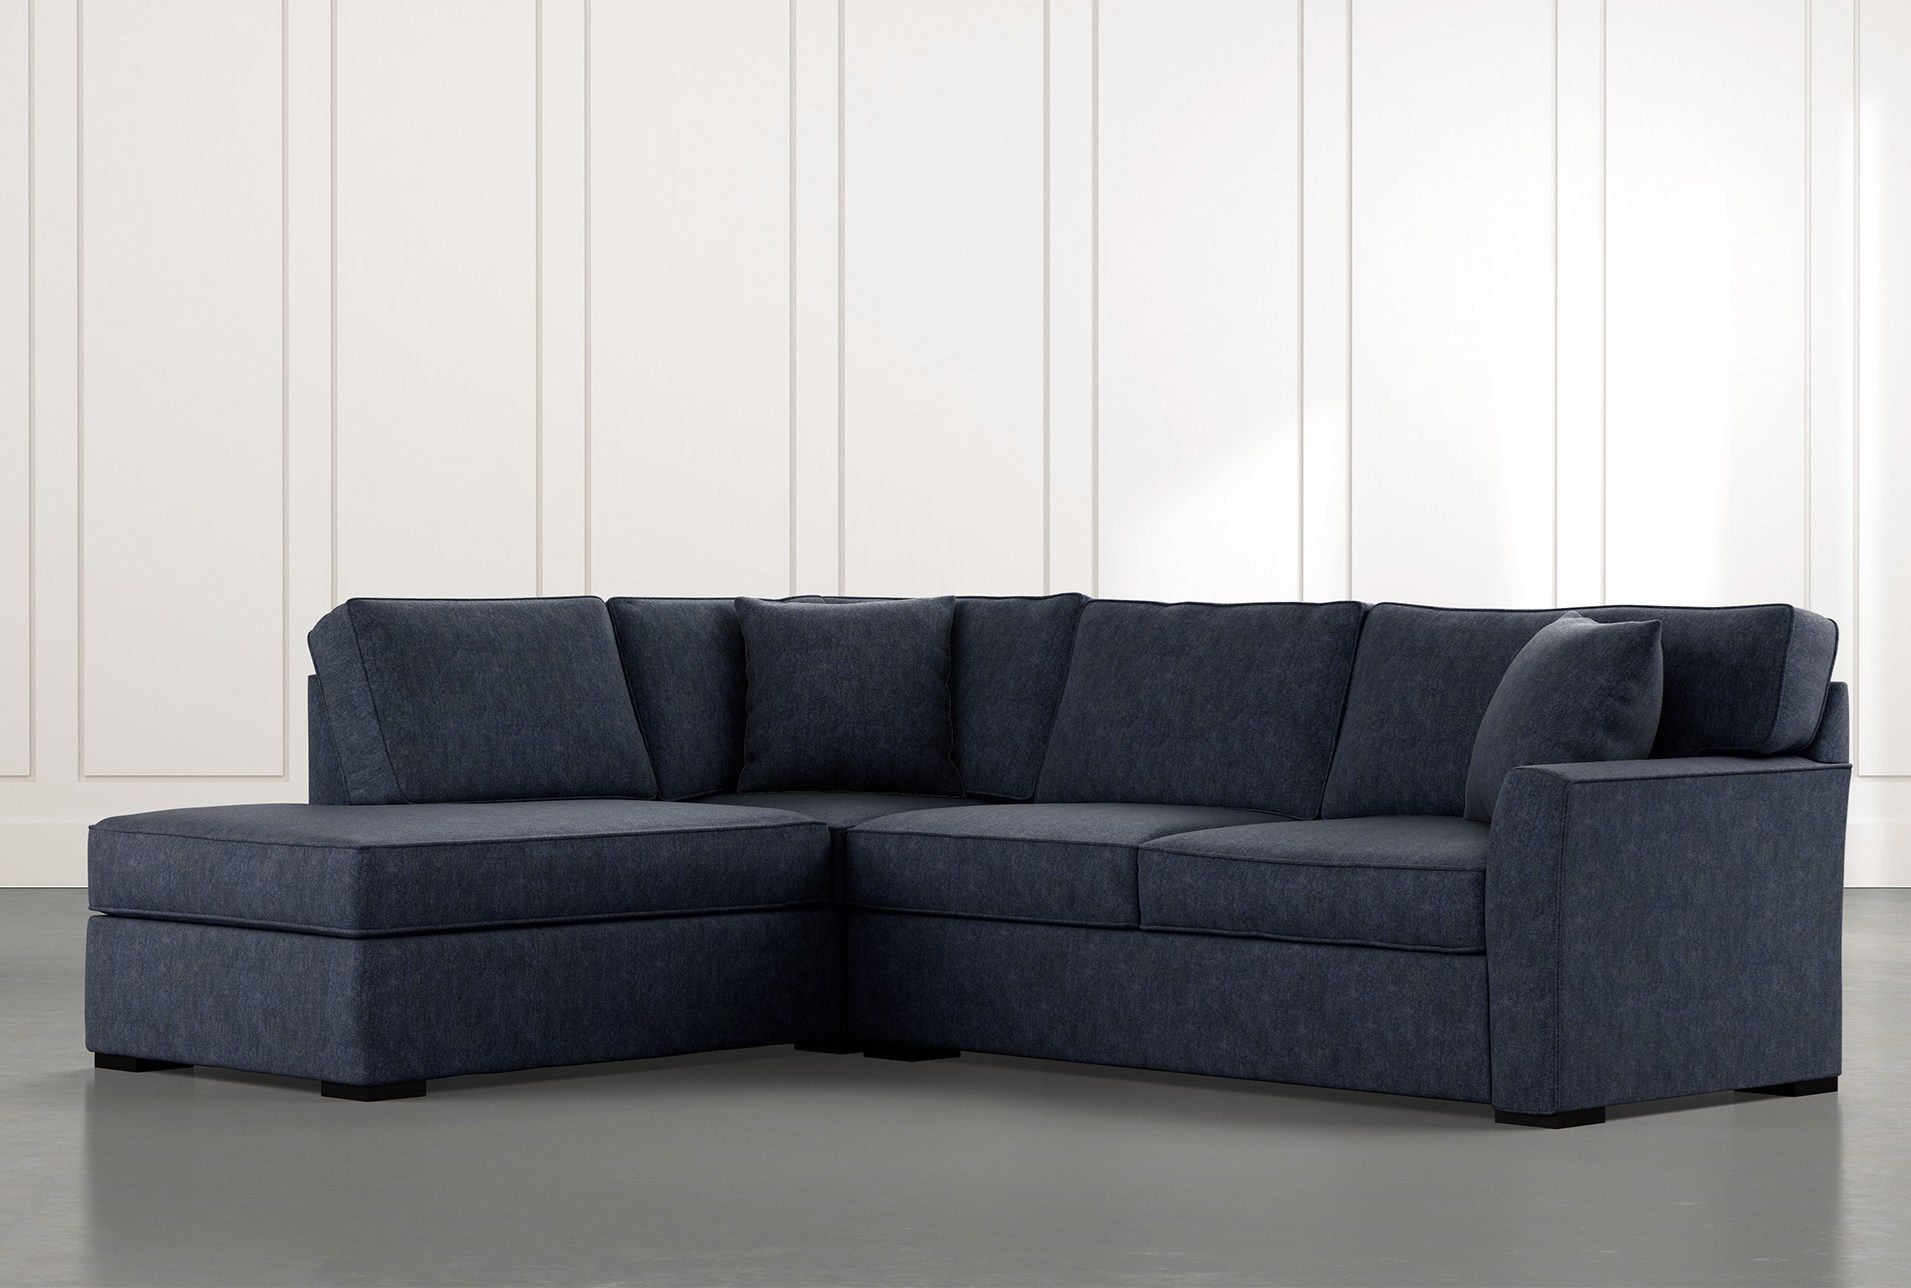 Aspen Navy Blue 2 Piece Sleeper Sectional With Left Arm Pertaining To Aspen 2 Piece Sleeper Sectionals With Laf Chaise (View 3 of 15)